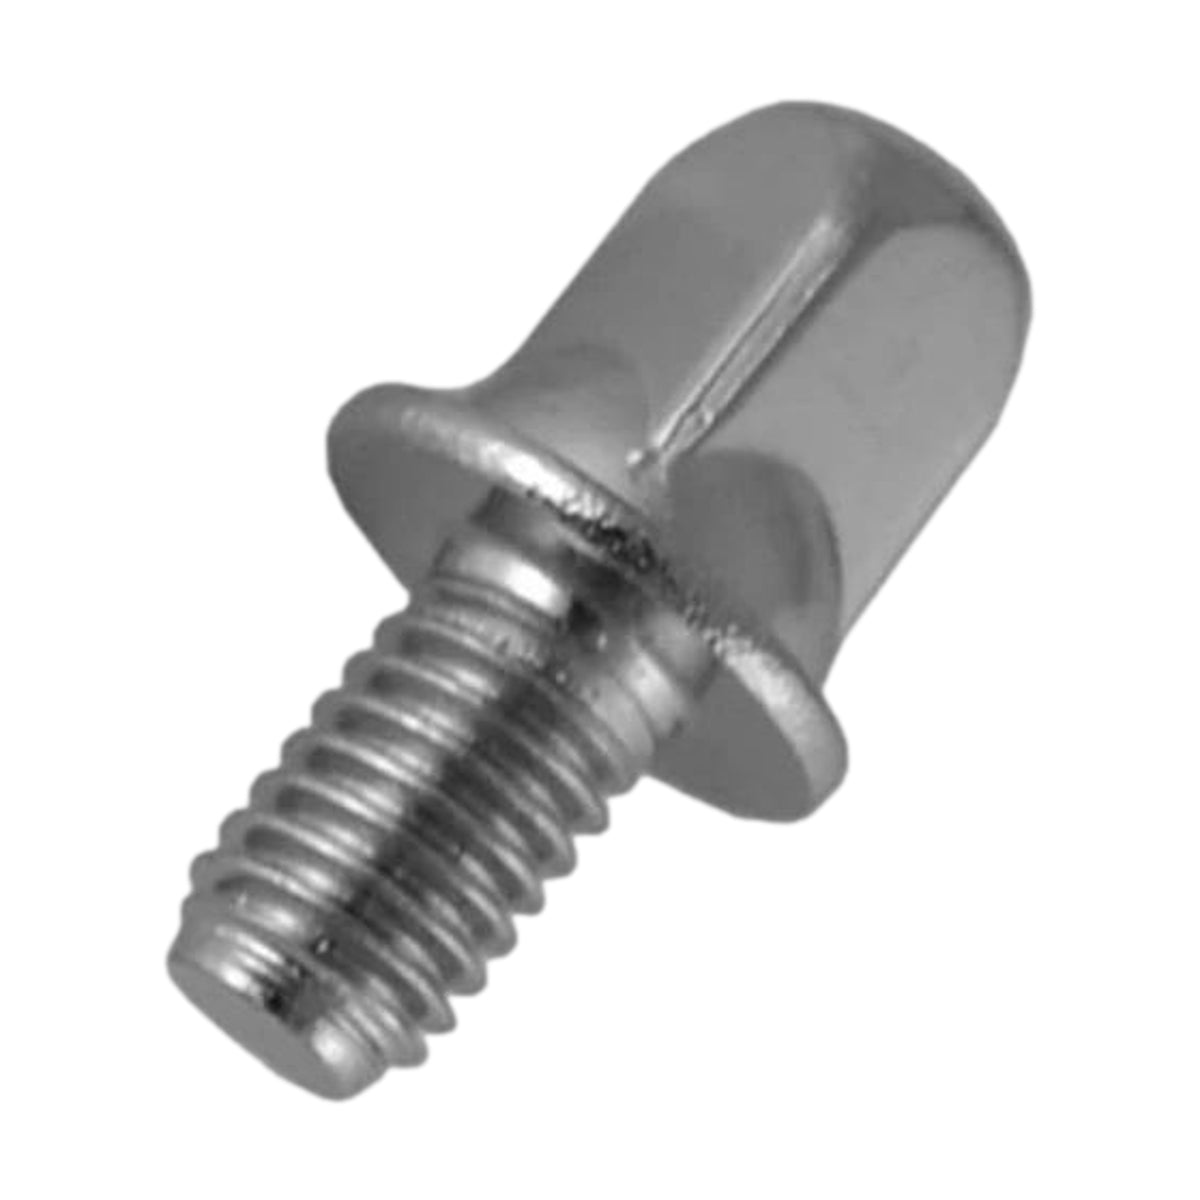 Pearl Key Bolt For Universal Joint M5 x 8mm